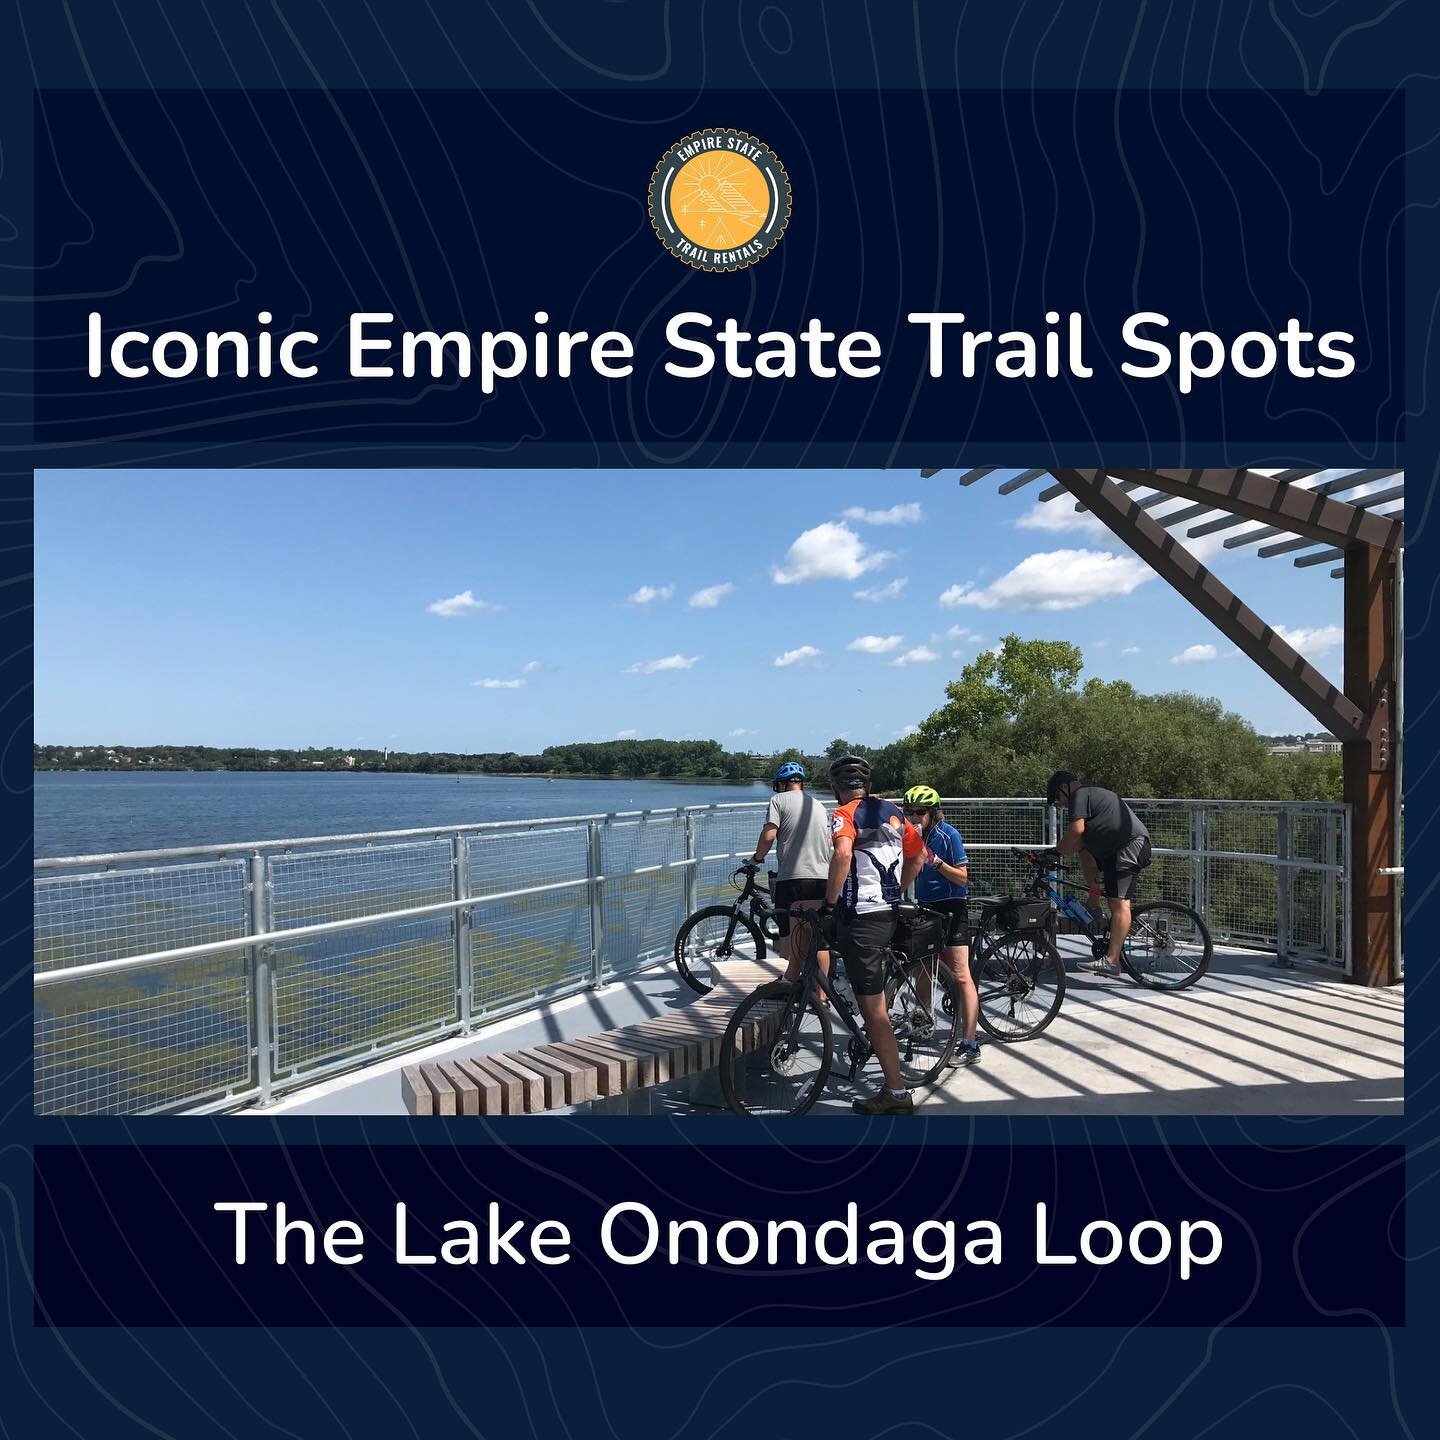 Up next on our &ldquo;Iconic Spots on the Trail&rdquo; is a little gem connected to the trail: Lake Onondaga near Syracuse on the Erie Canalway Trail 😍 This nine-mile loop is a gorgeous haven of wildlife &amp; flora. 🌸 Once renovations completed in